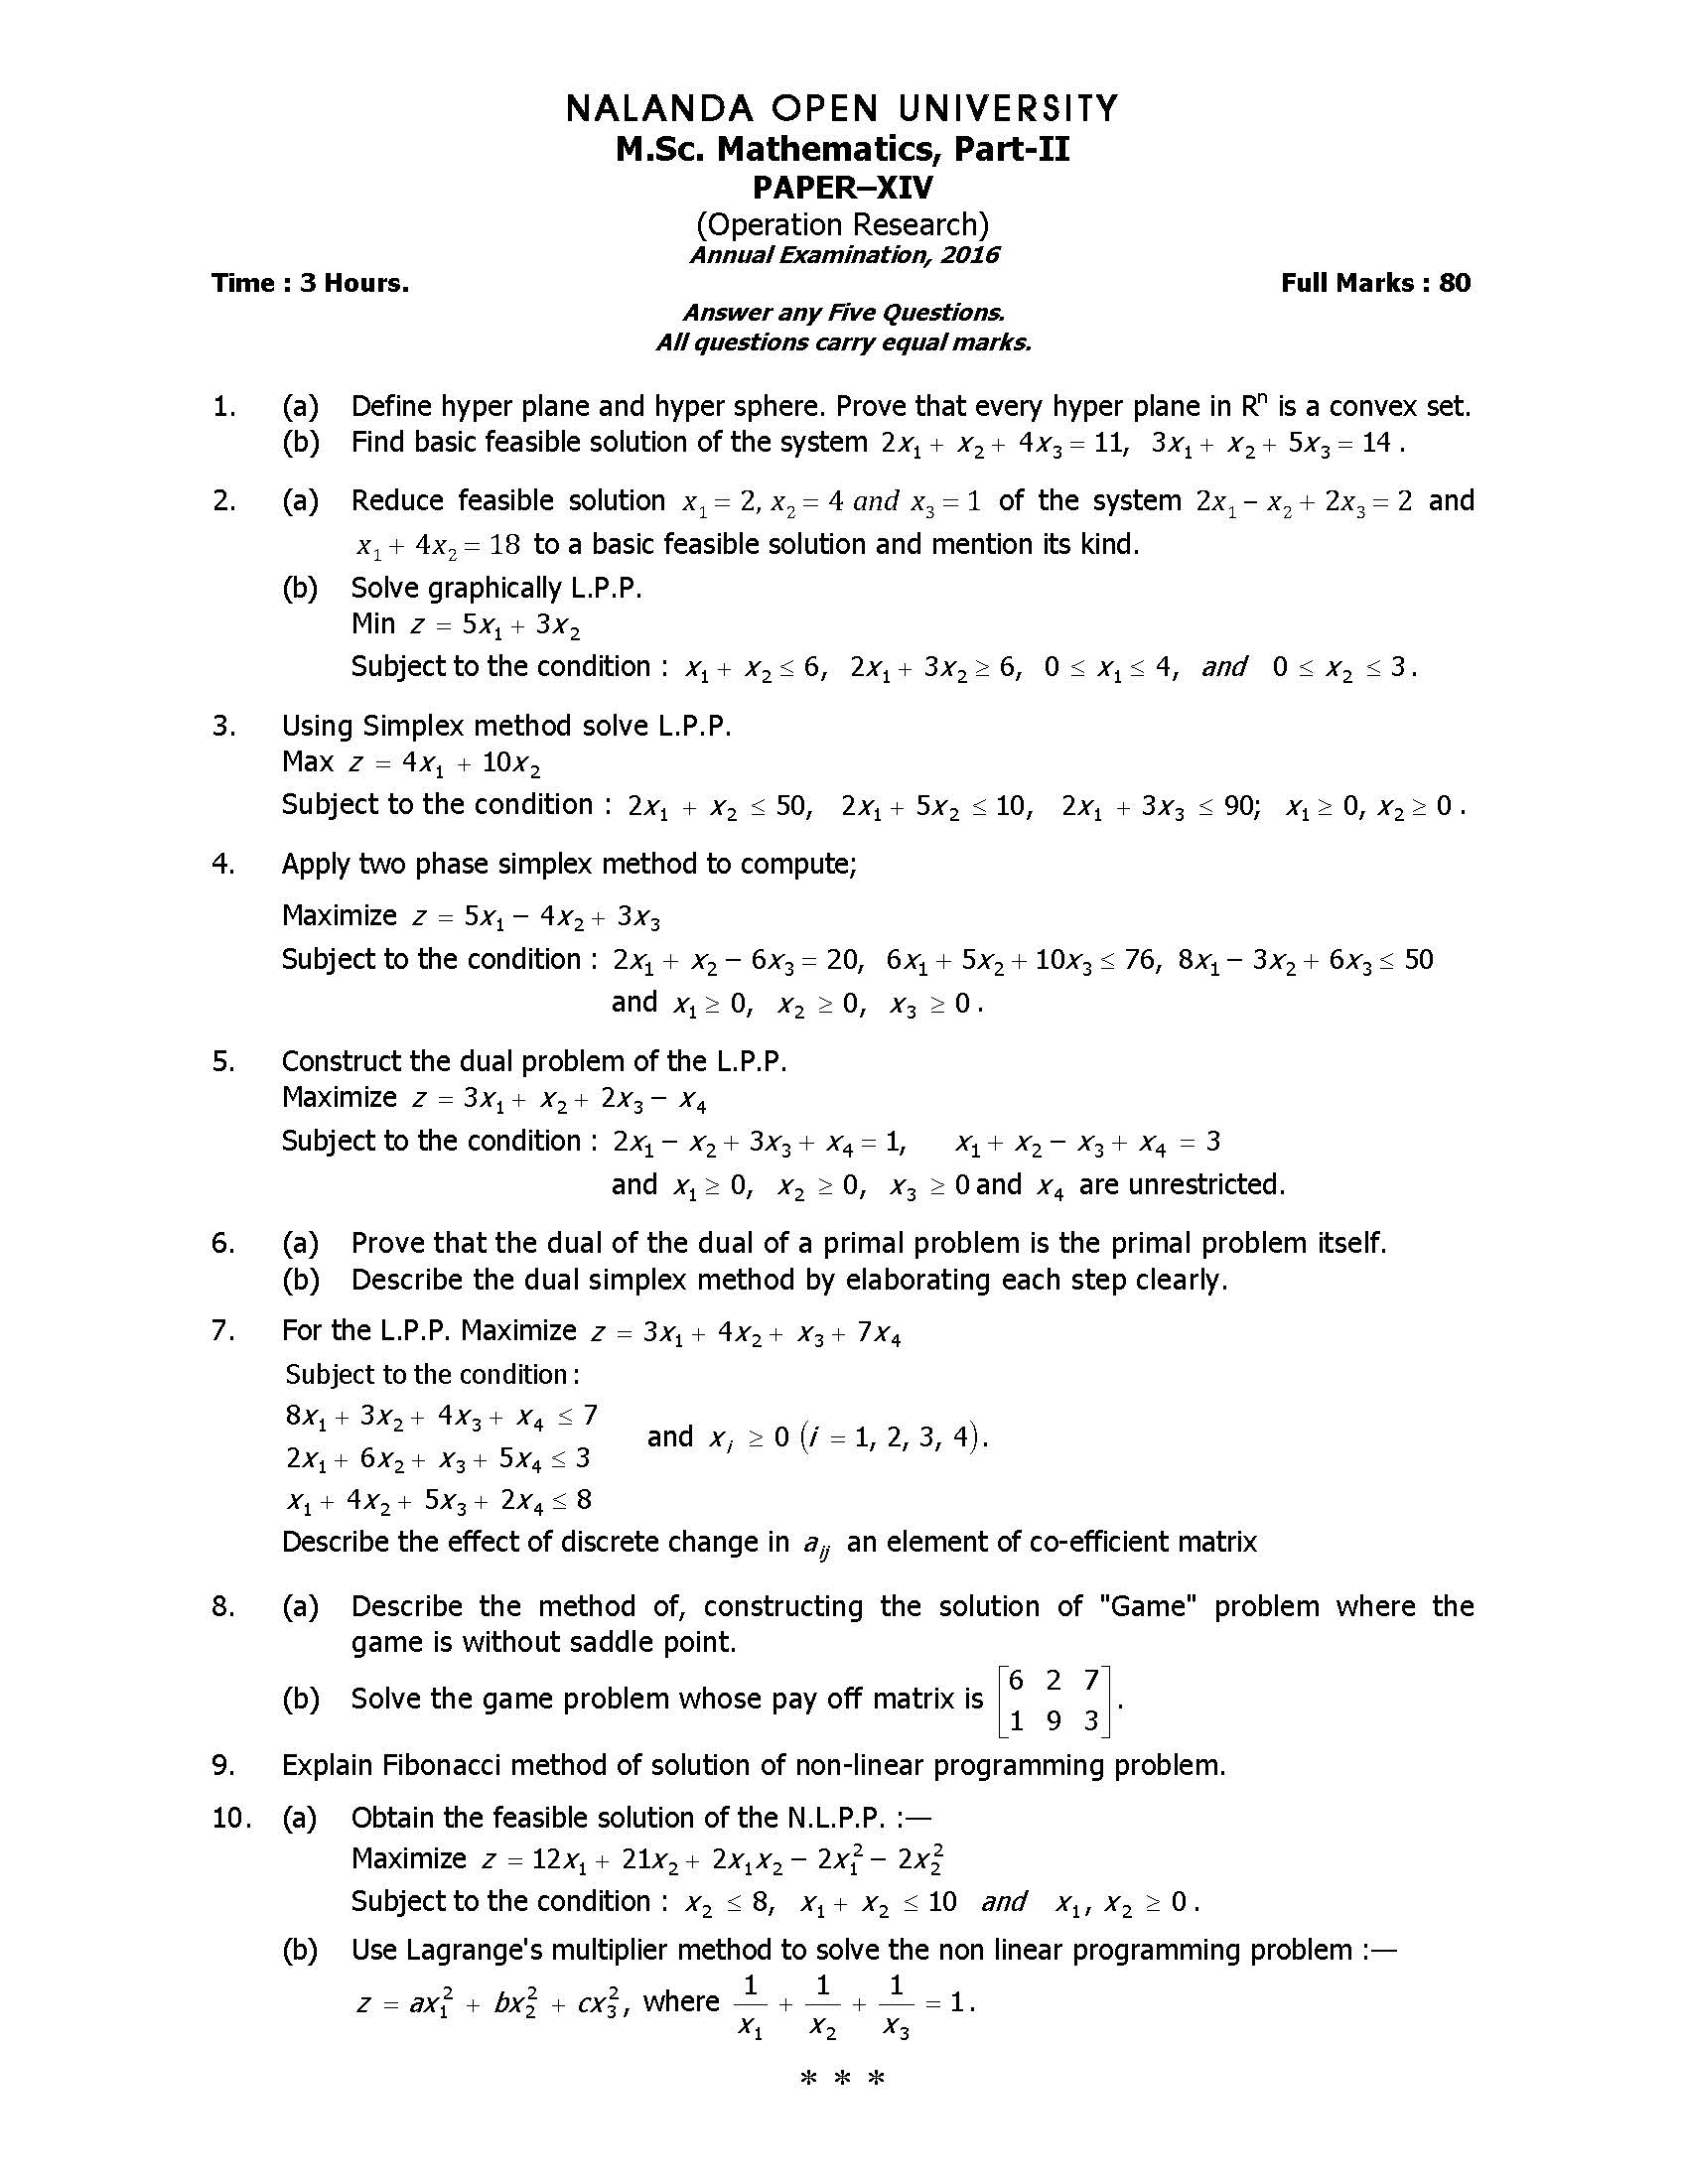 applied operations research previous question papers